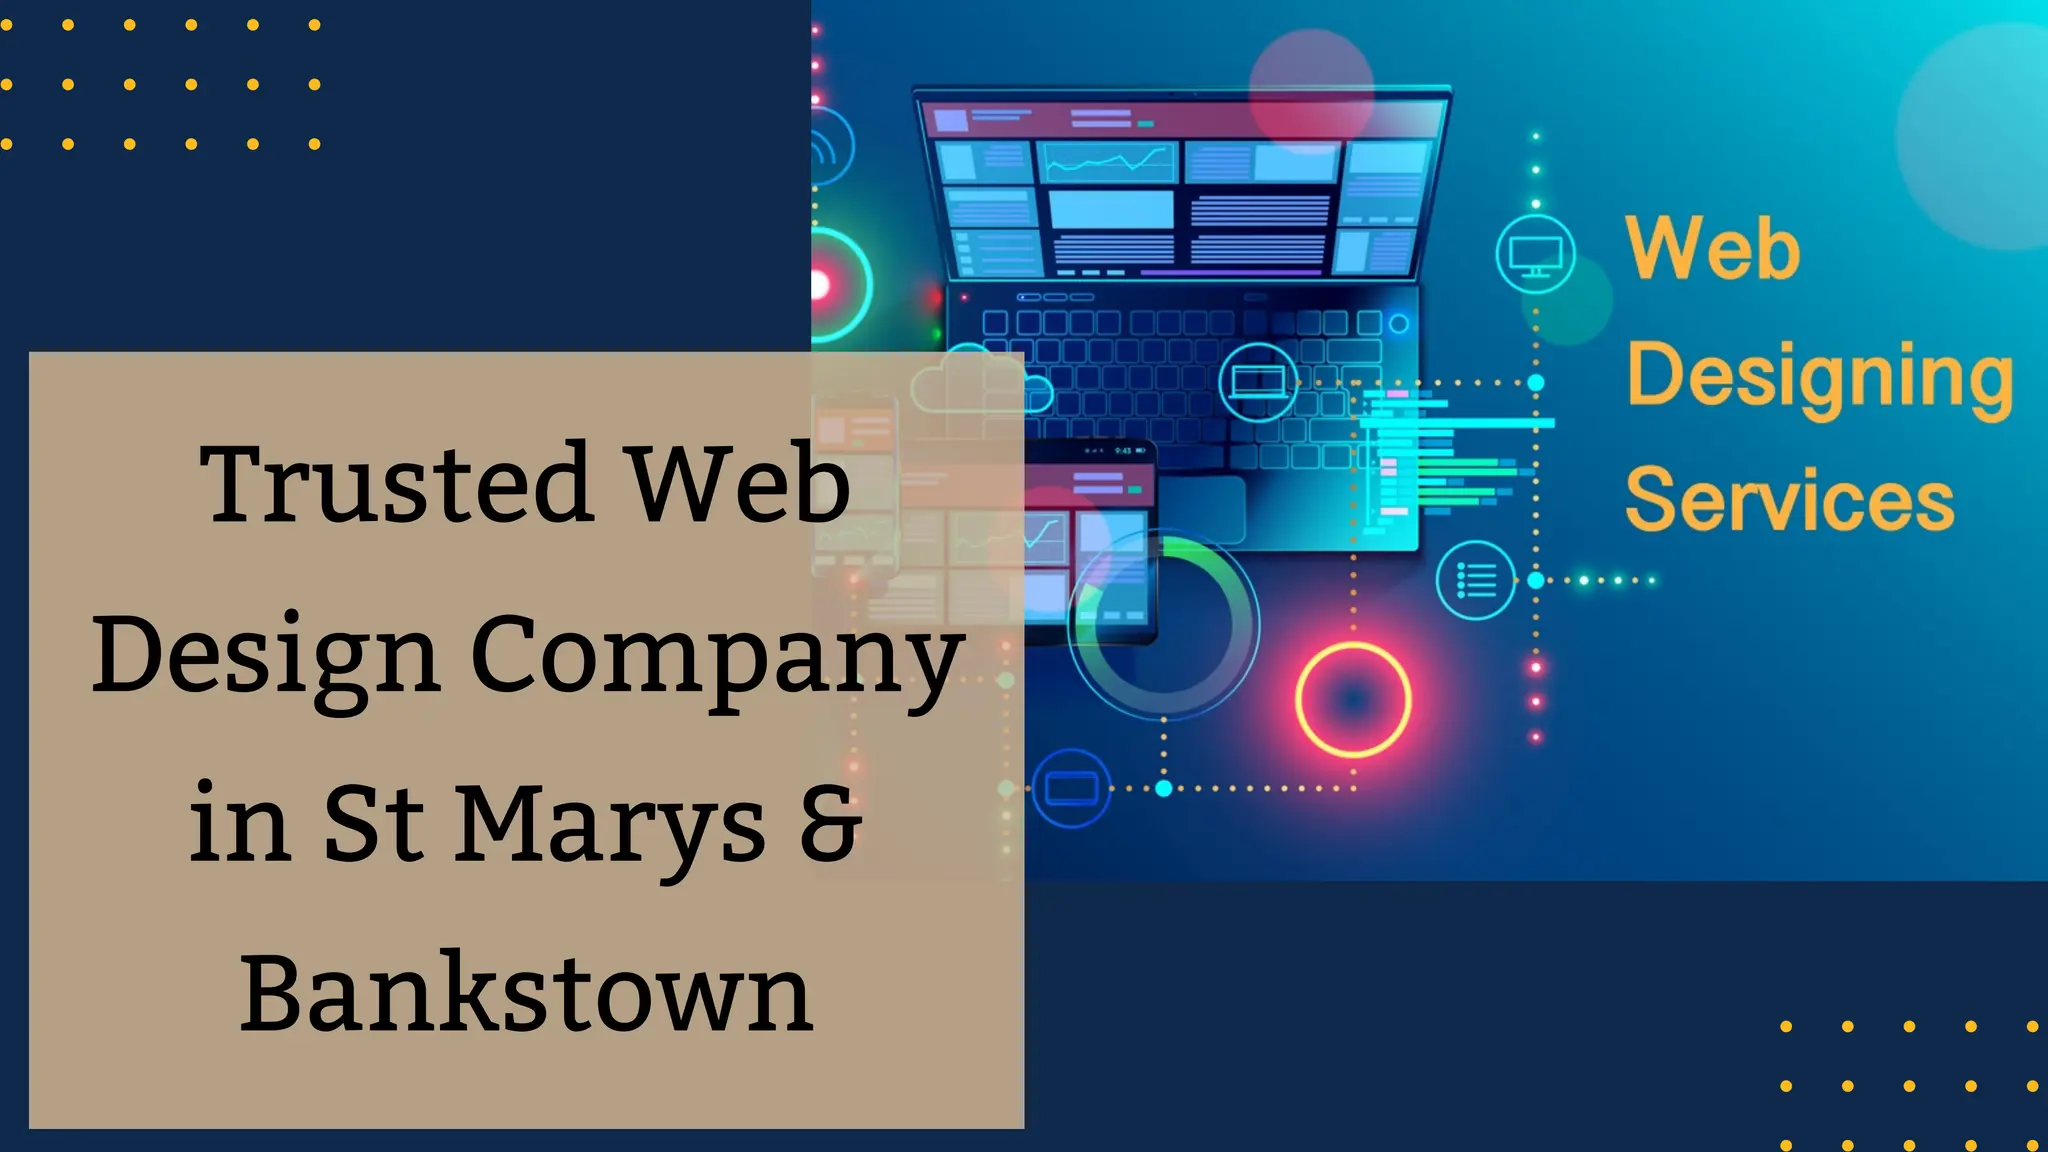 Trusted Web Design Company in St Marys & Bankstown